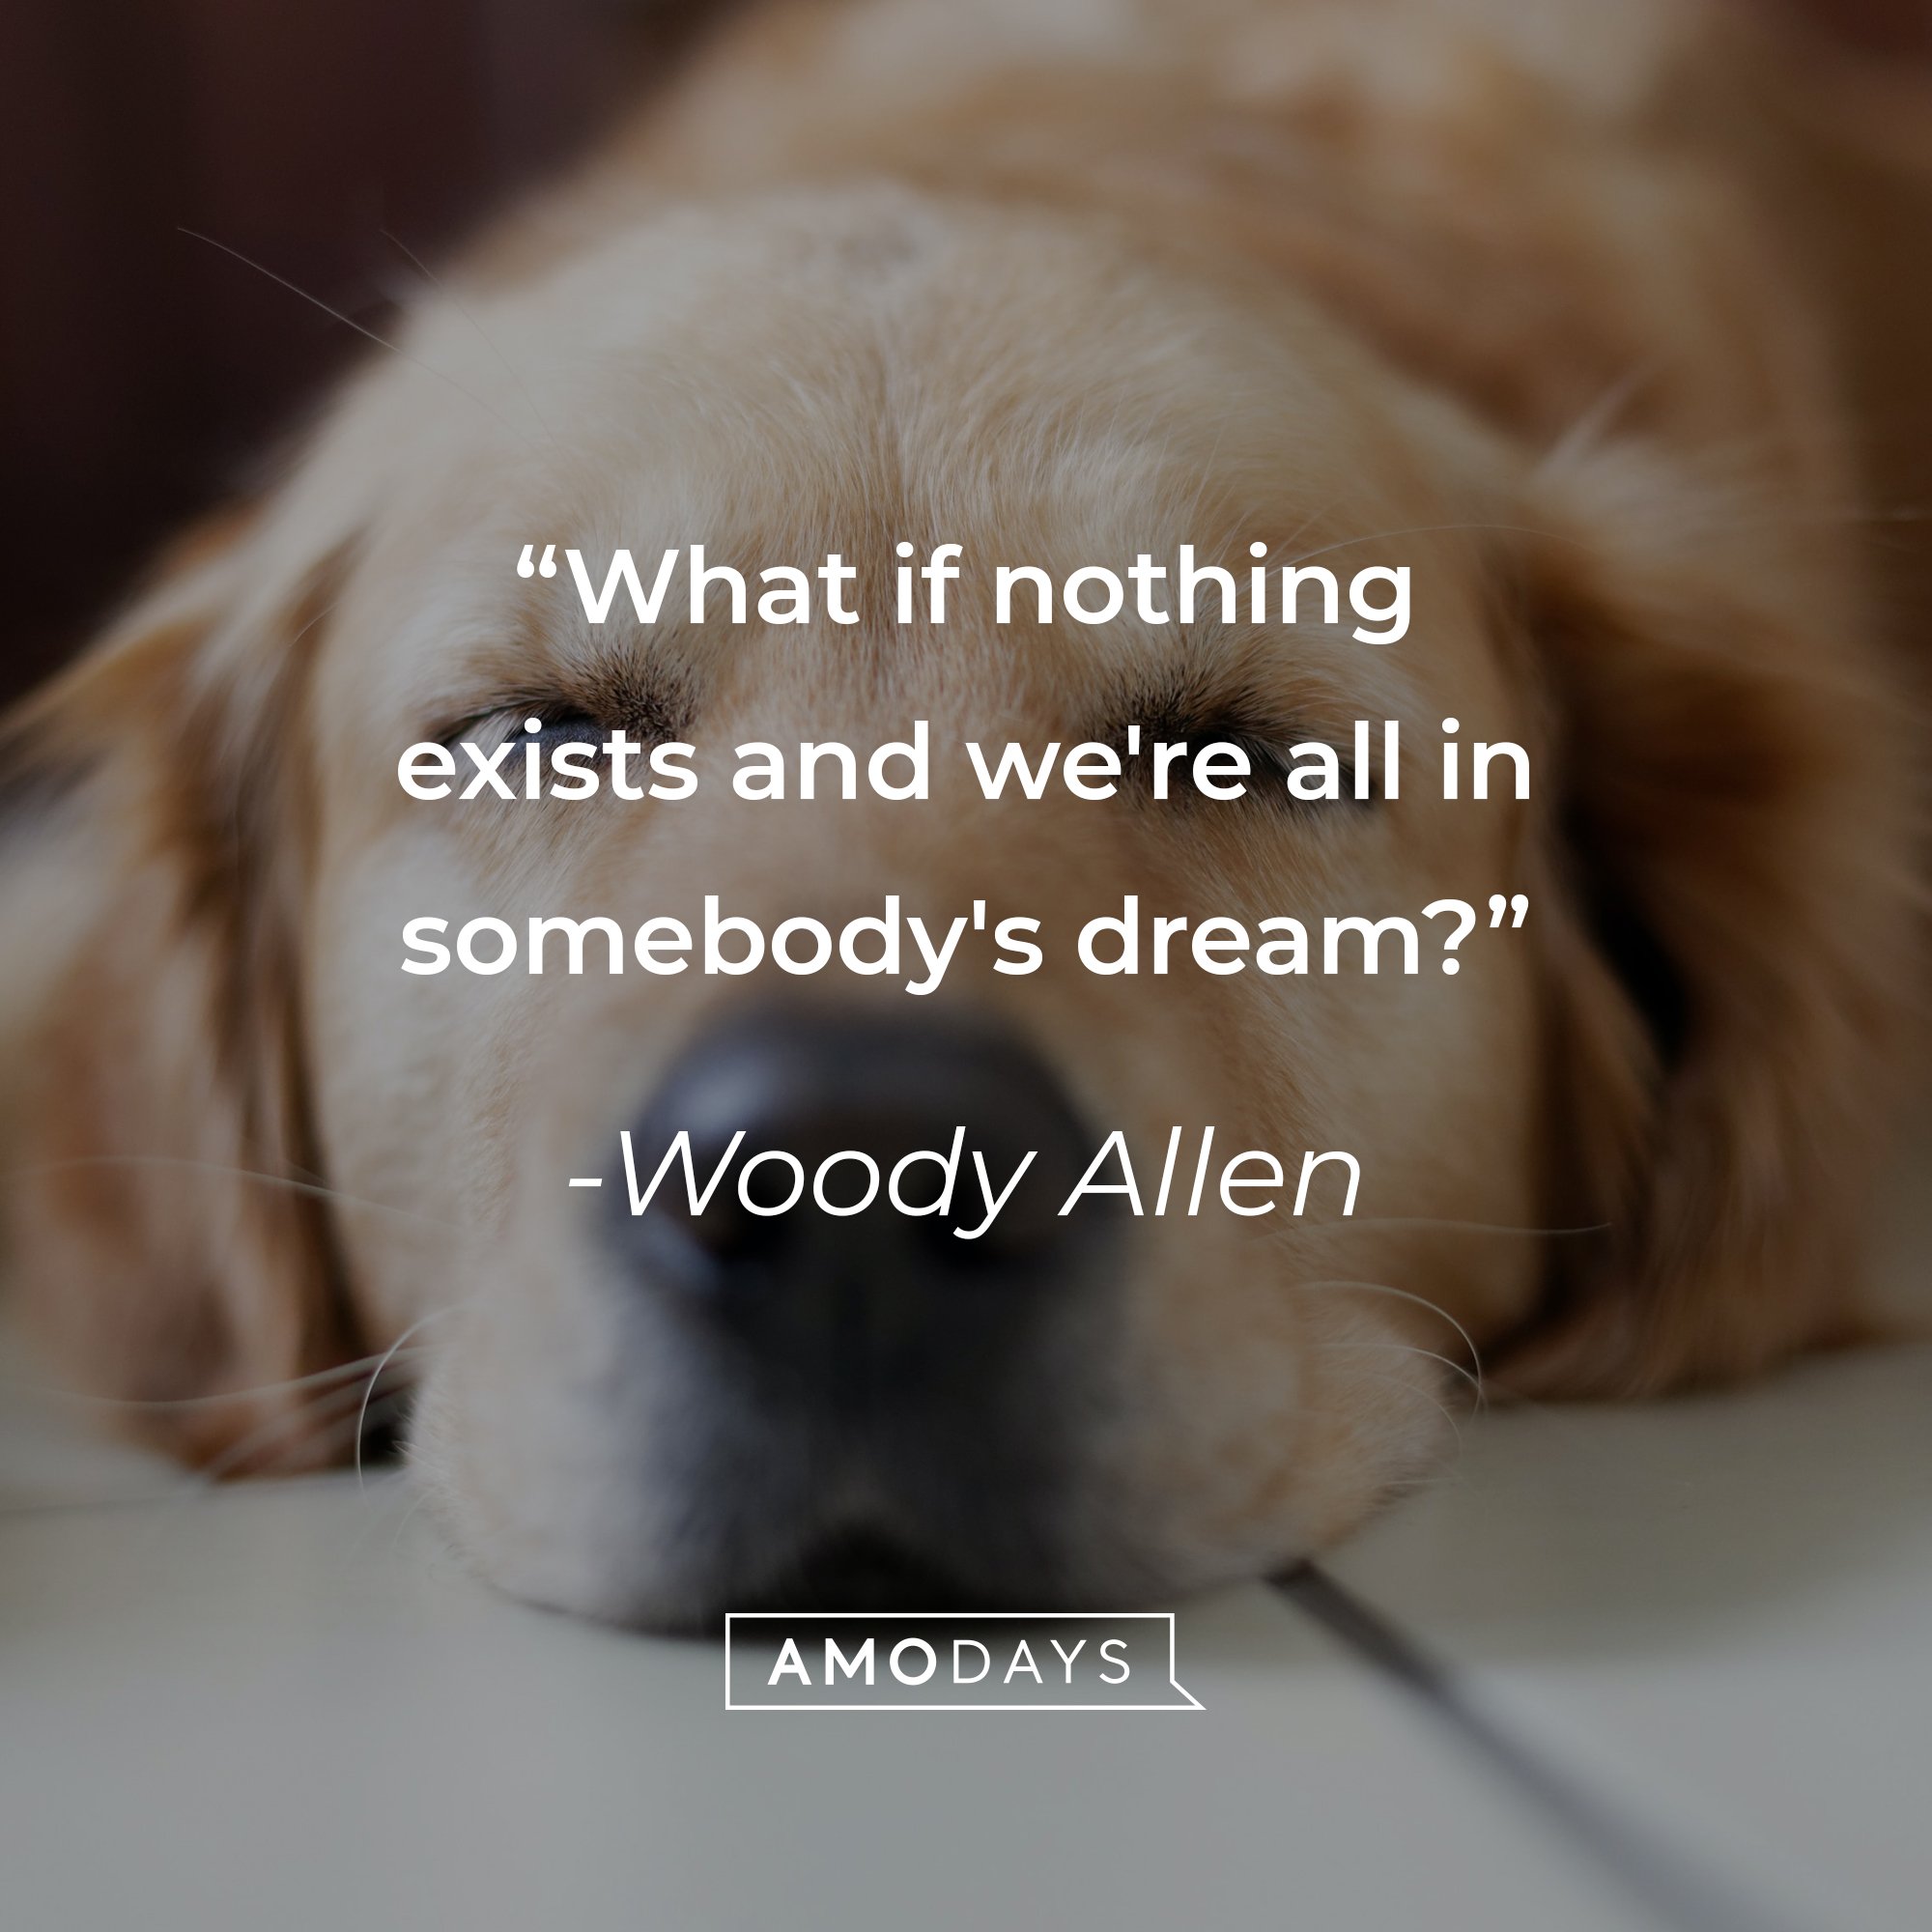 Woody Allen's quote: "What if nothing exists and we're all in somebody's dream?" | Image: AmoDays